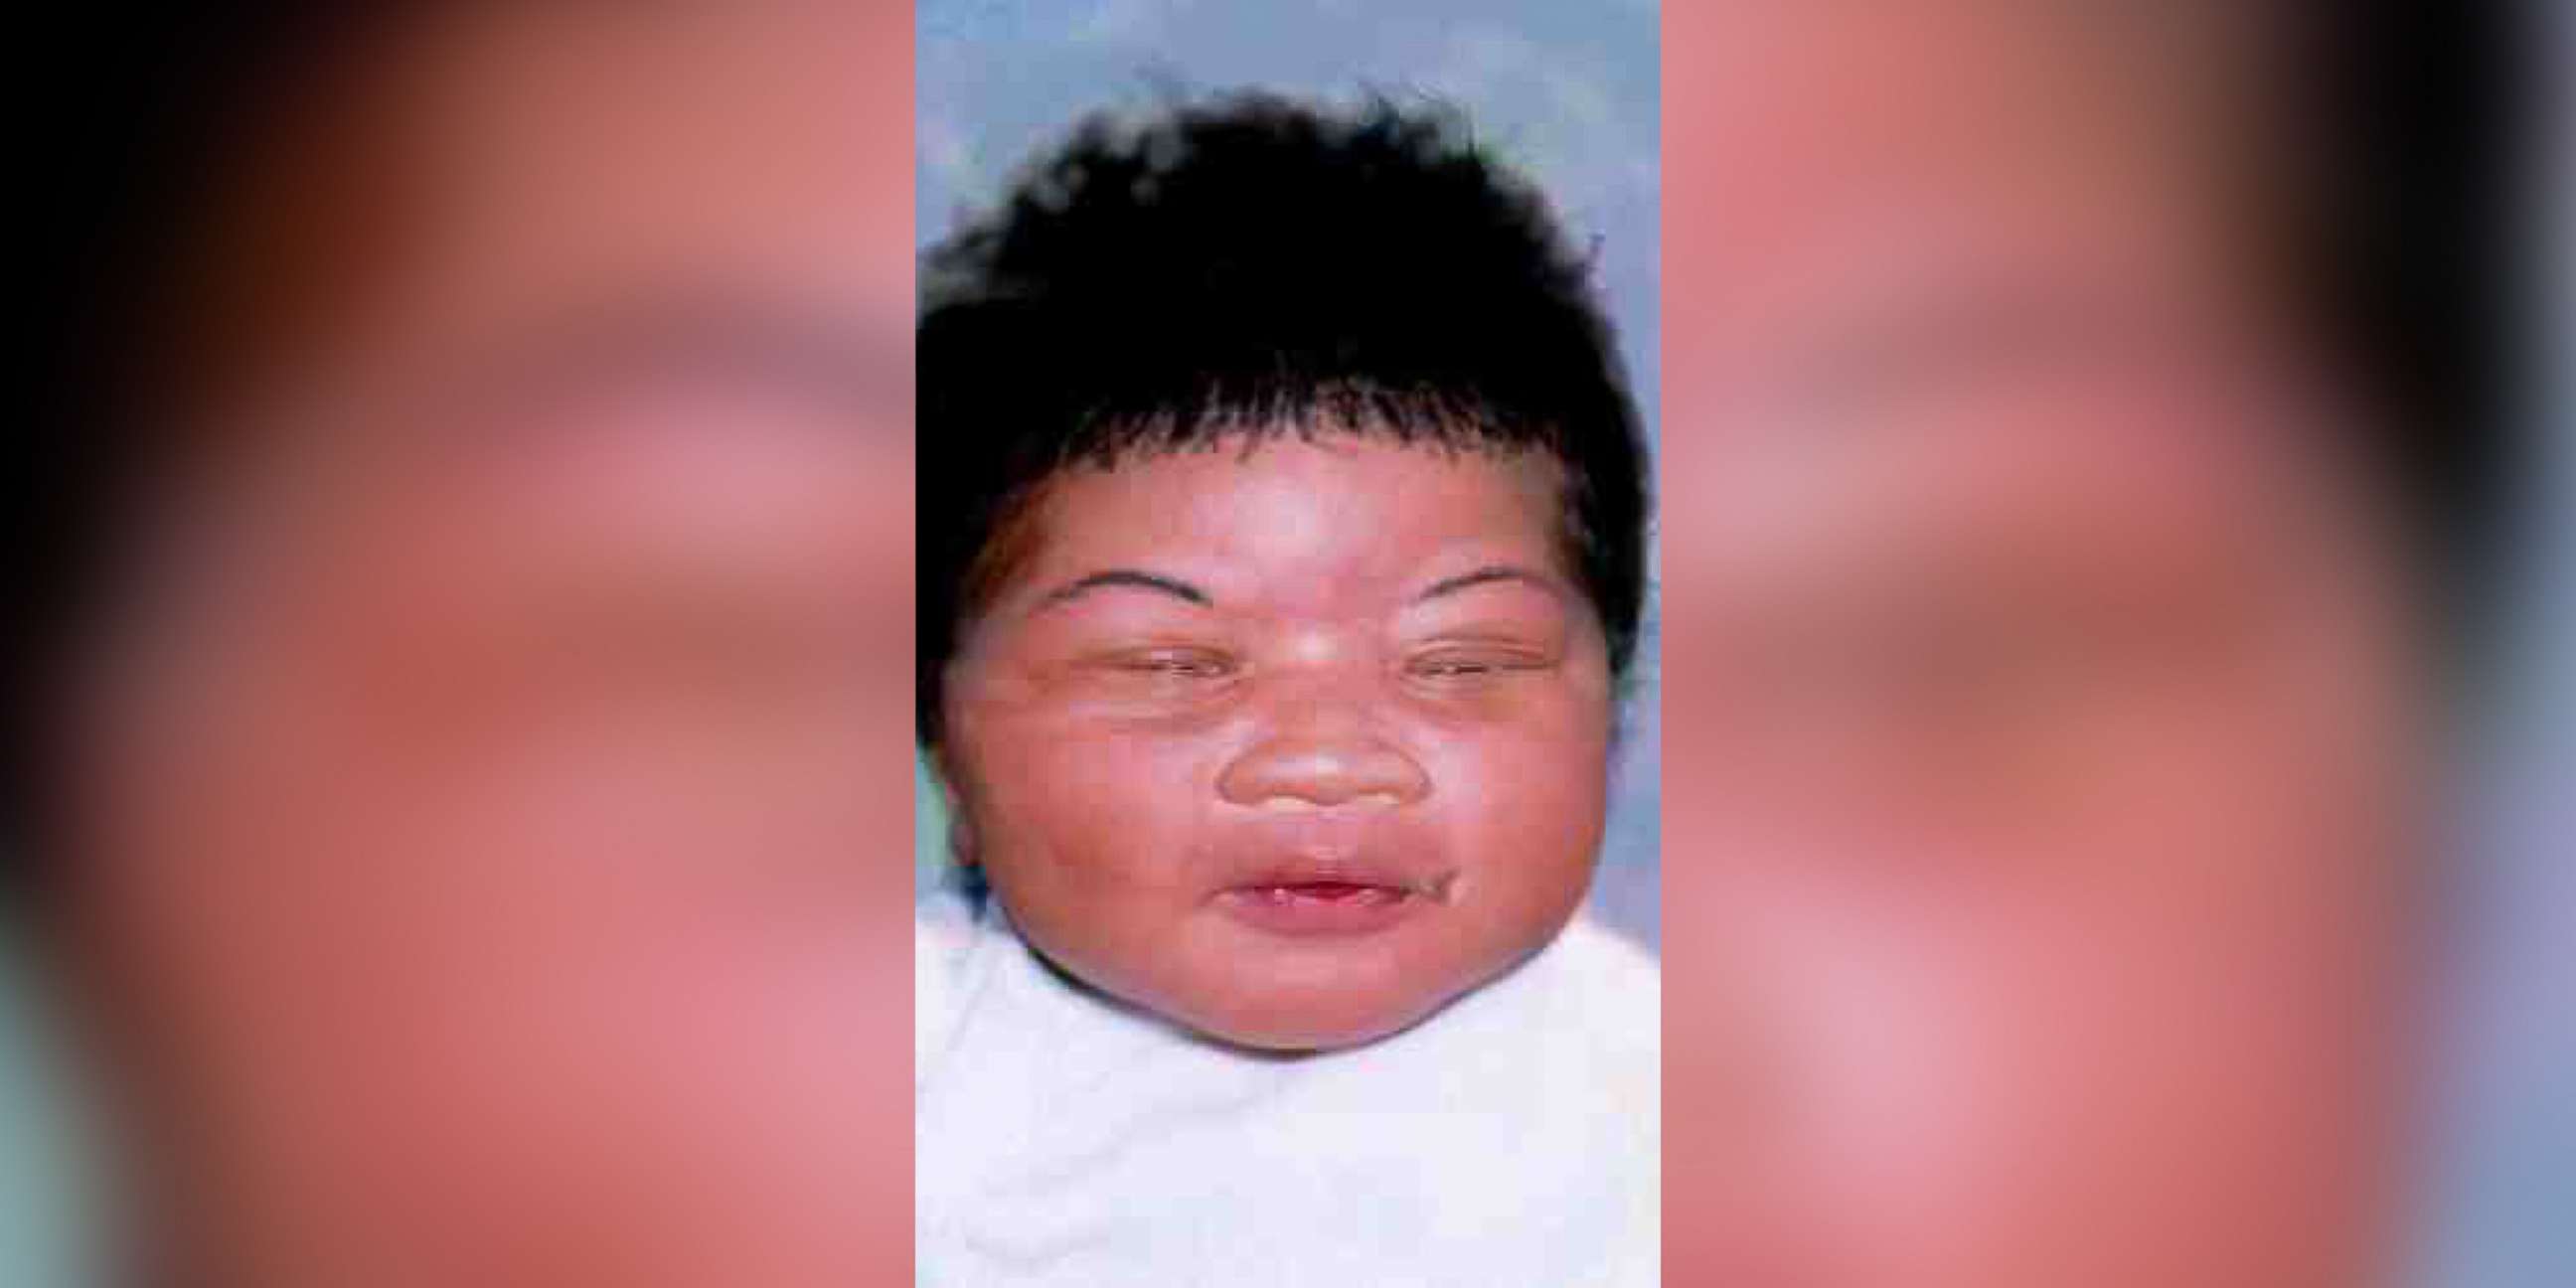 PHOTO: The Jacksonville Sheriff's Office in Florida released this artist's depiction of an infant that was taken from a Jacksonville hospital hours after she was born in 1998.